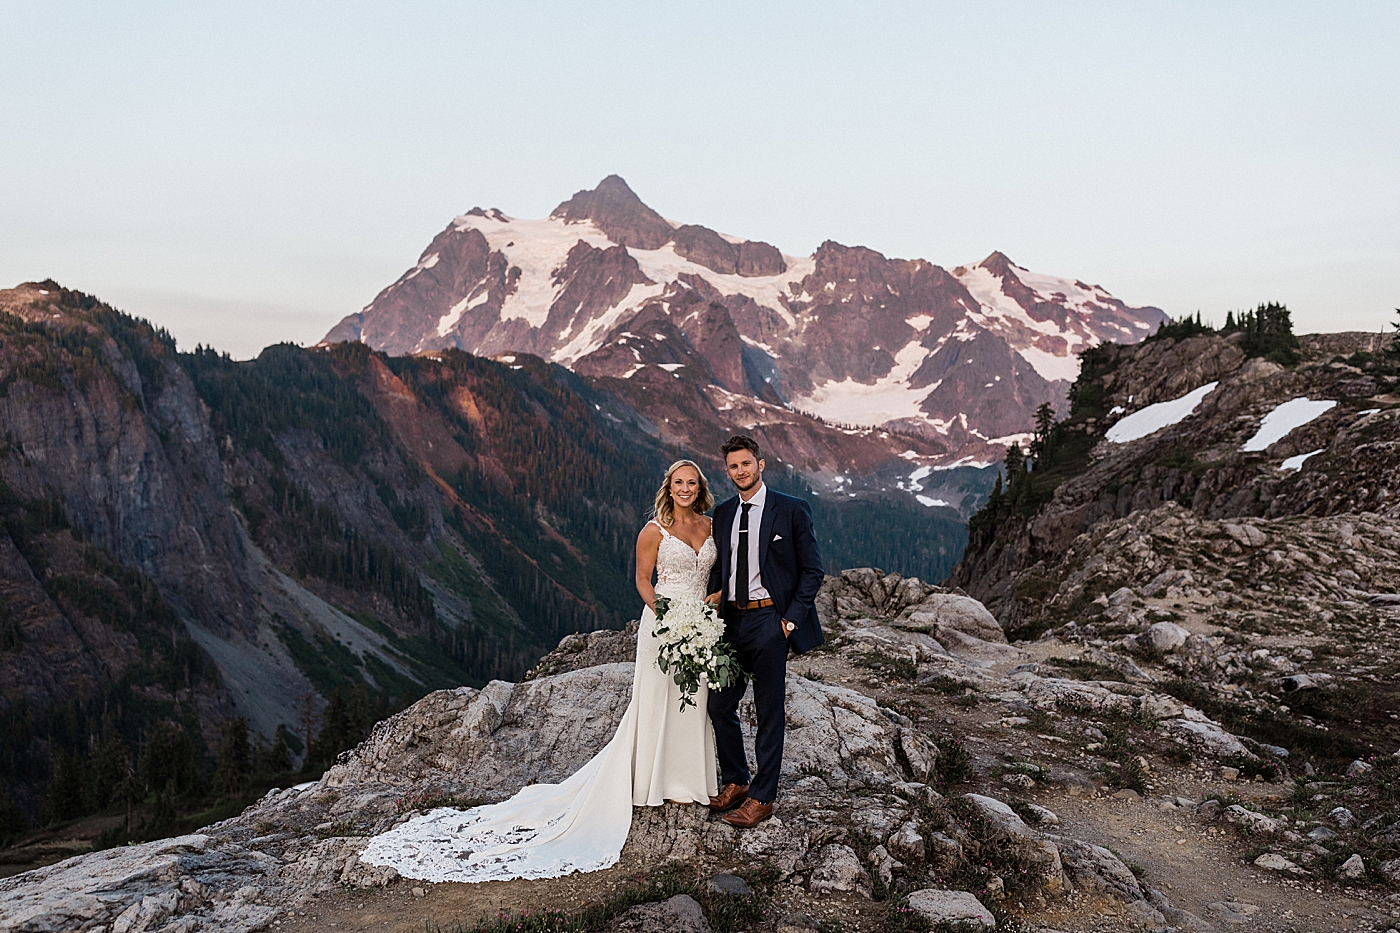 Elopement at Artist Point | Photo by Megan Montalvo Photography